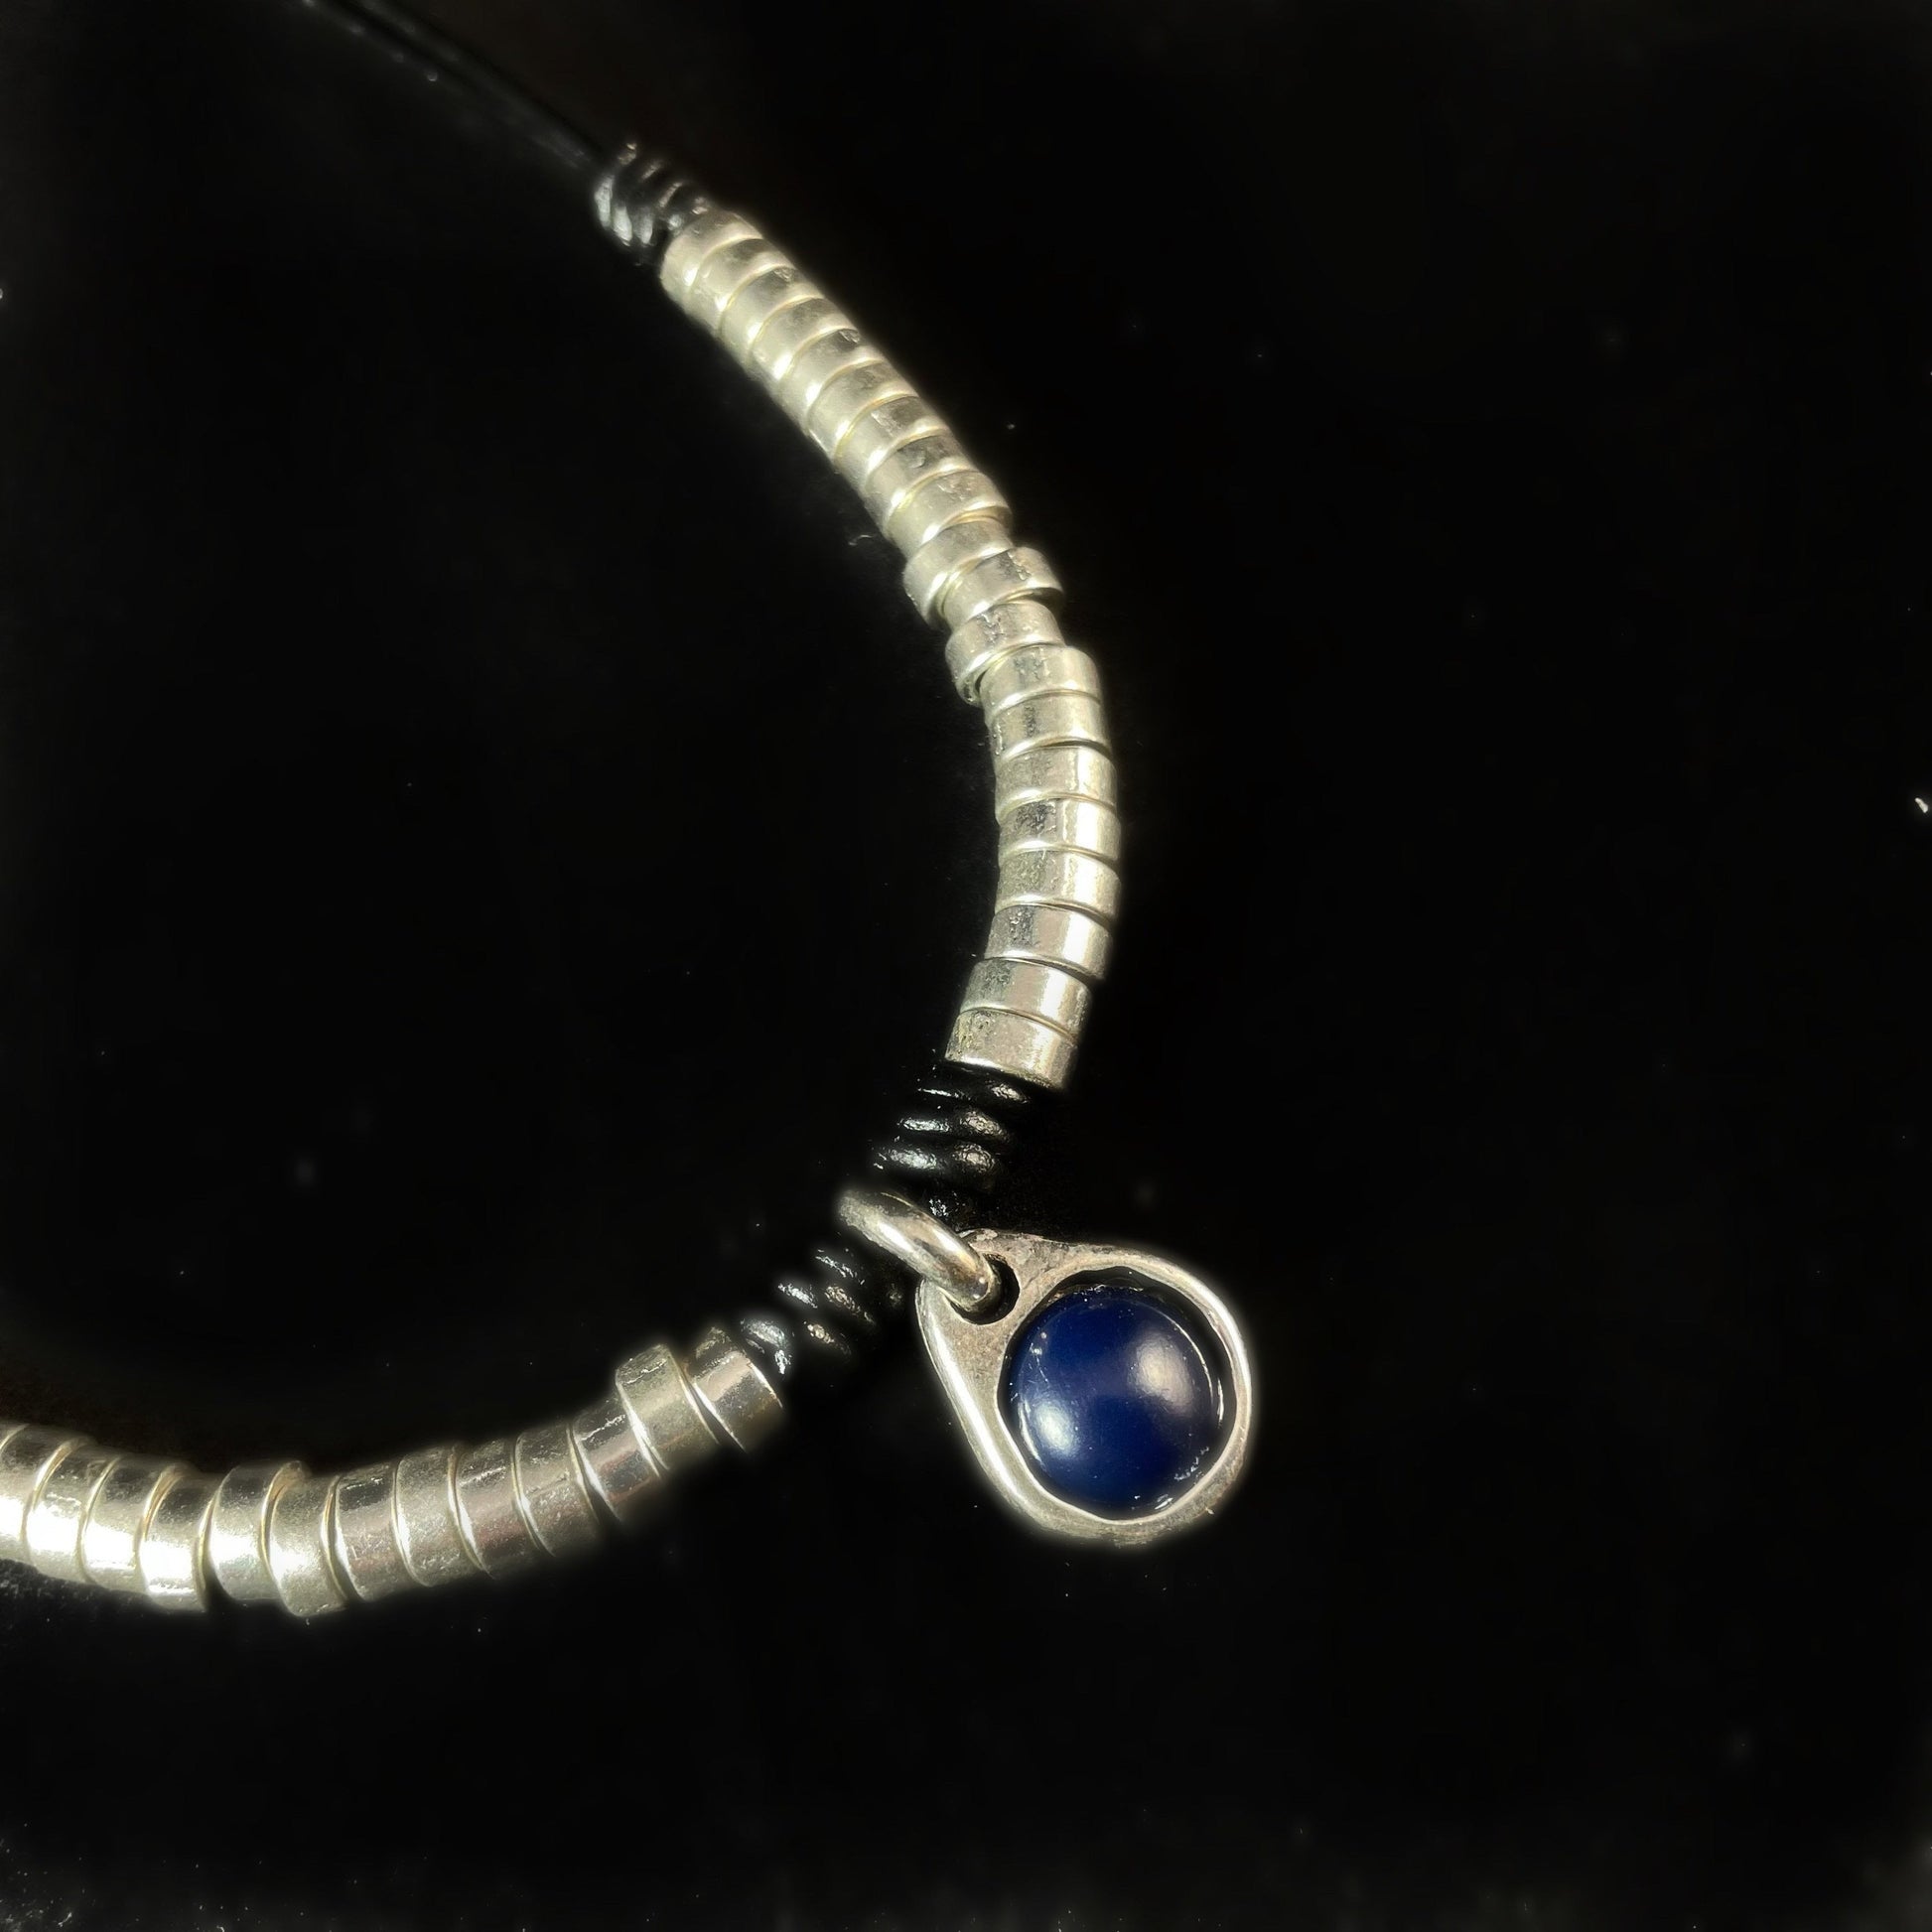 Silver and Blue Beaded, Leather Cord Necklace - Handmade in Spain